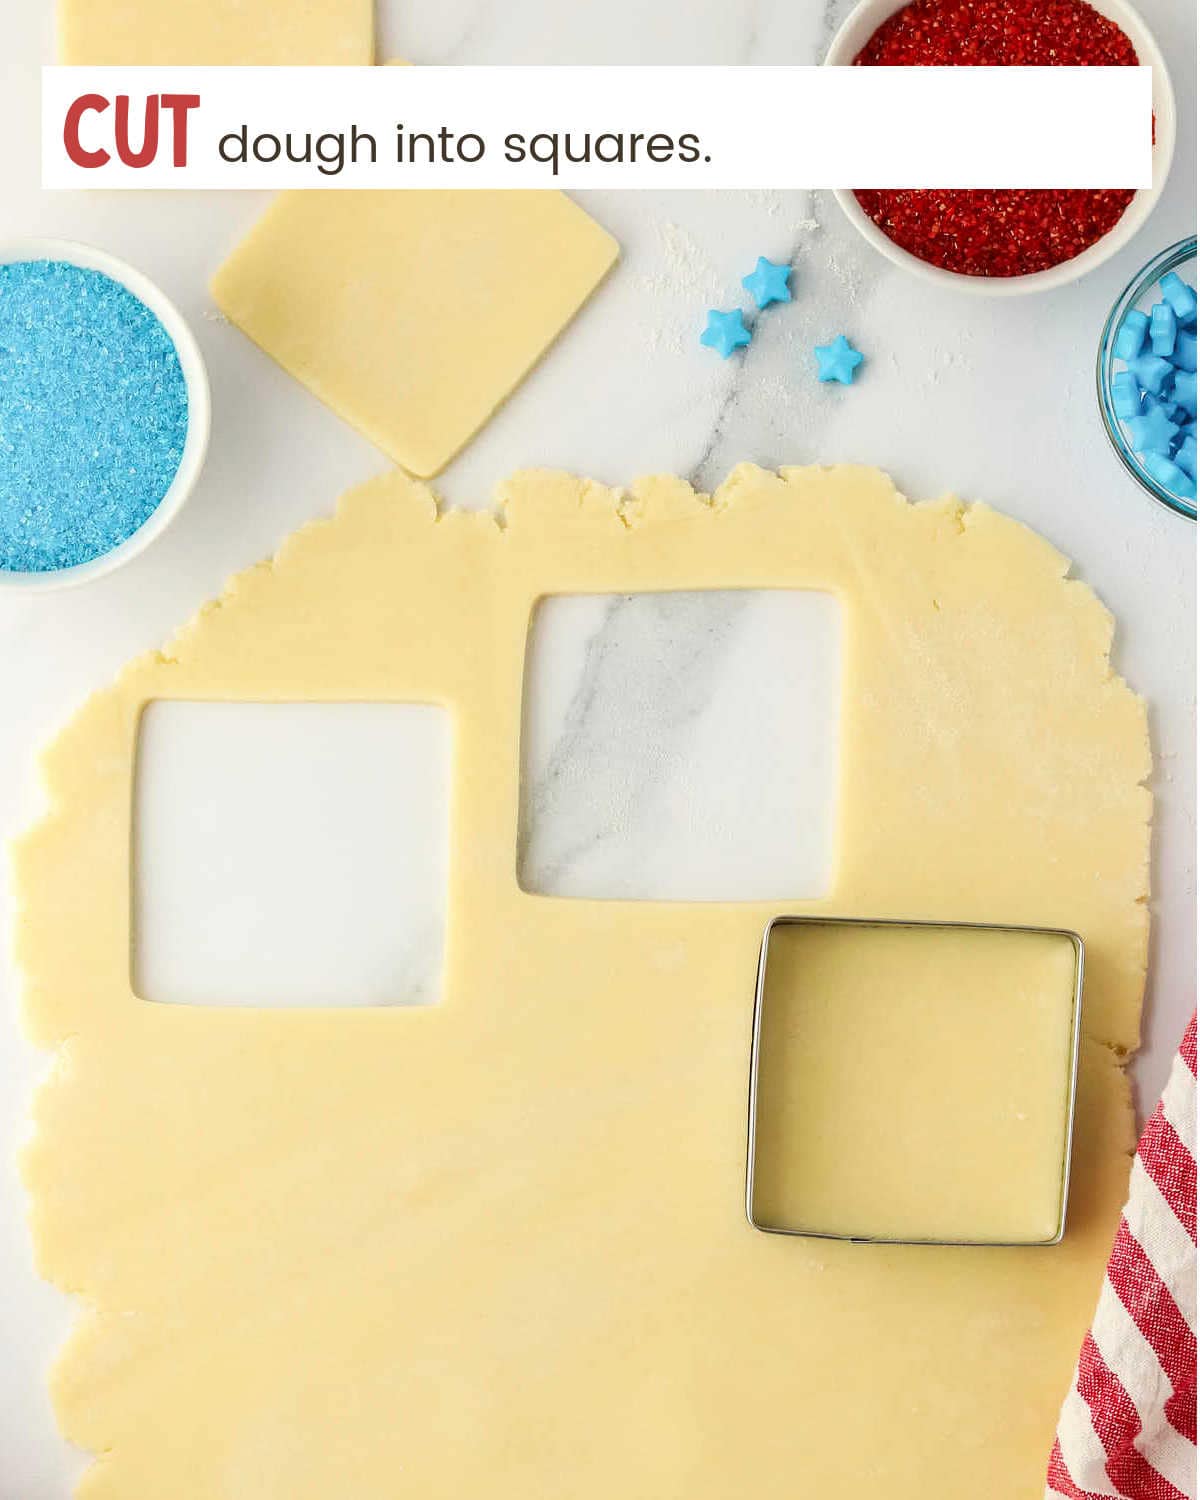 Cut dough into squares for Fourth of July Pinwheel Cookies